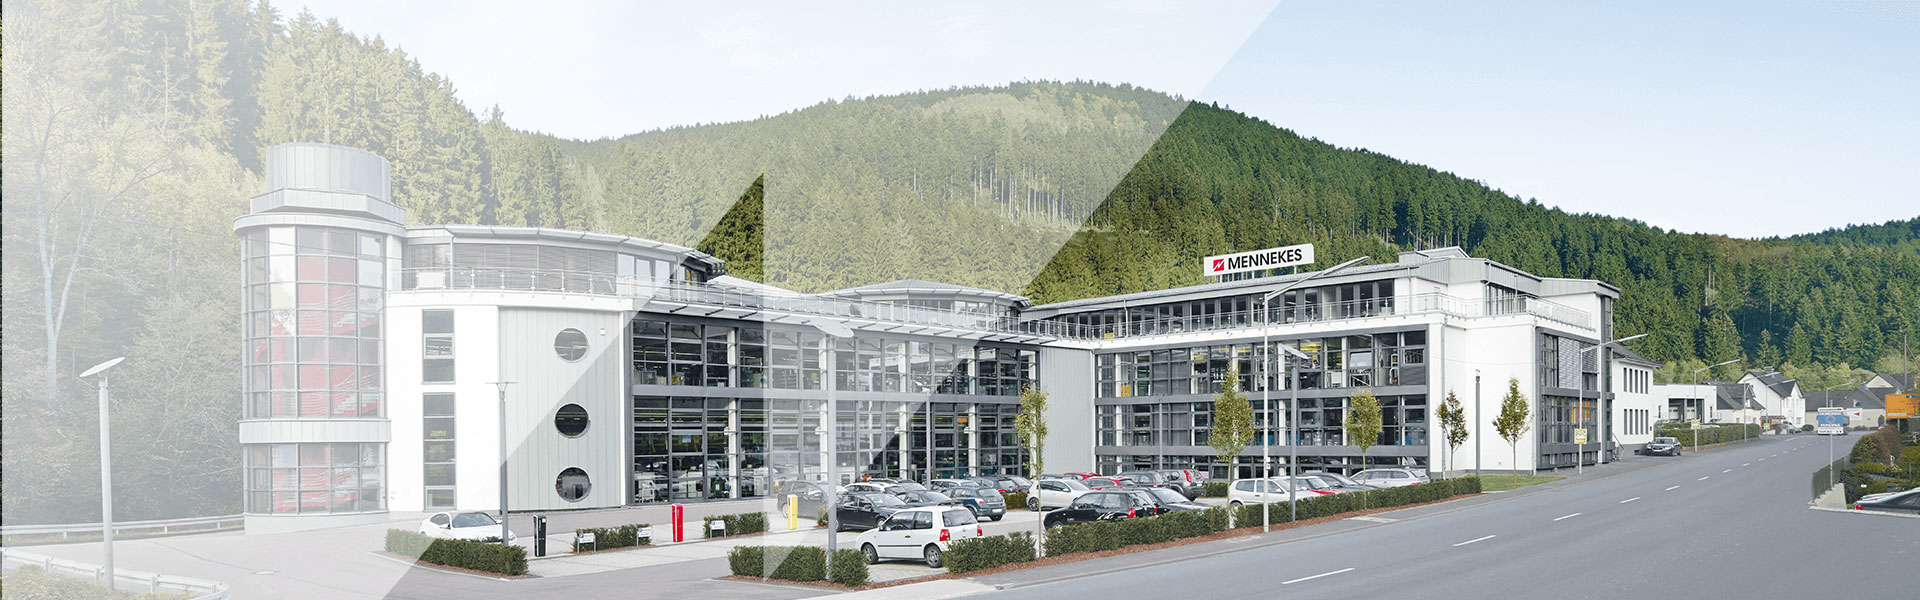 A picture showing the company building of MENNEKES Elektrotechnik